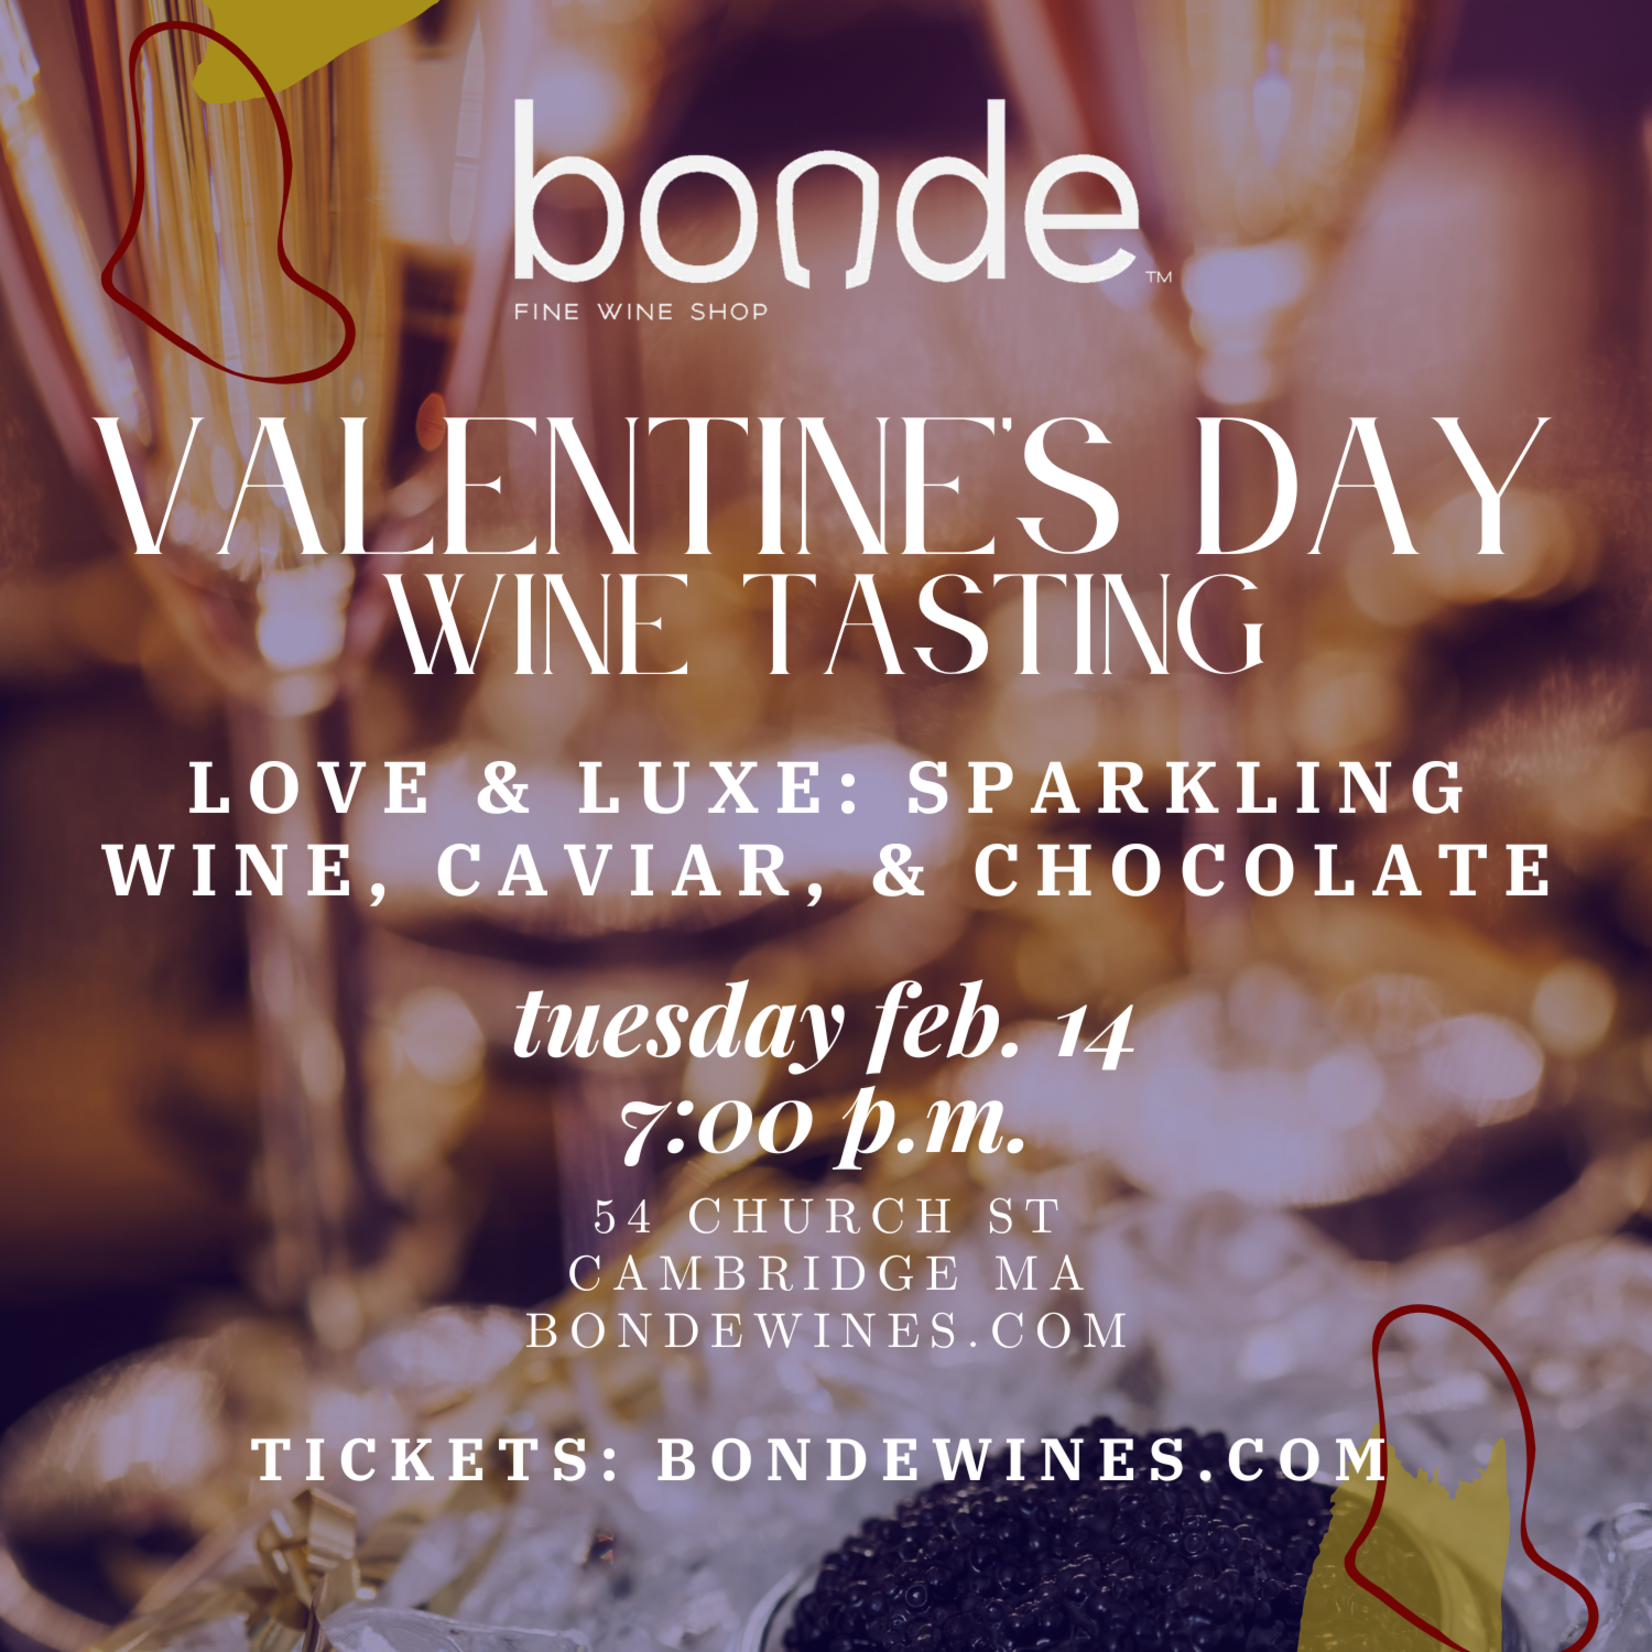 Love & Luxe: Sparkling Wines, Caviar, & Chocolate - Valentine's Day Wine Tasting - Tuesday February 14, 7:00 p.m.